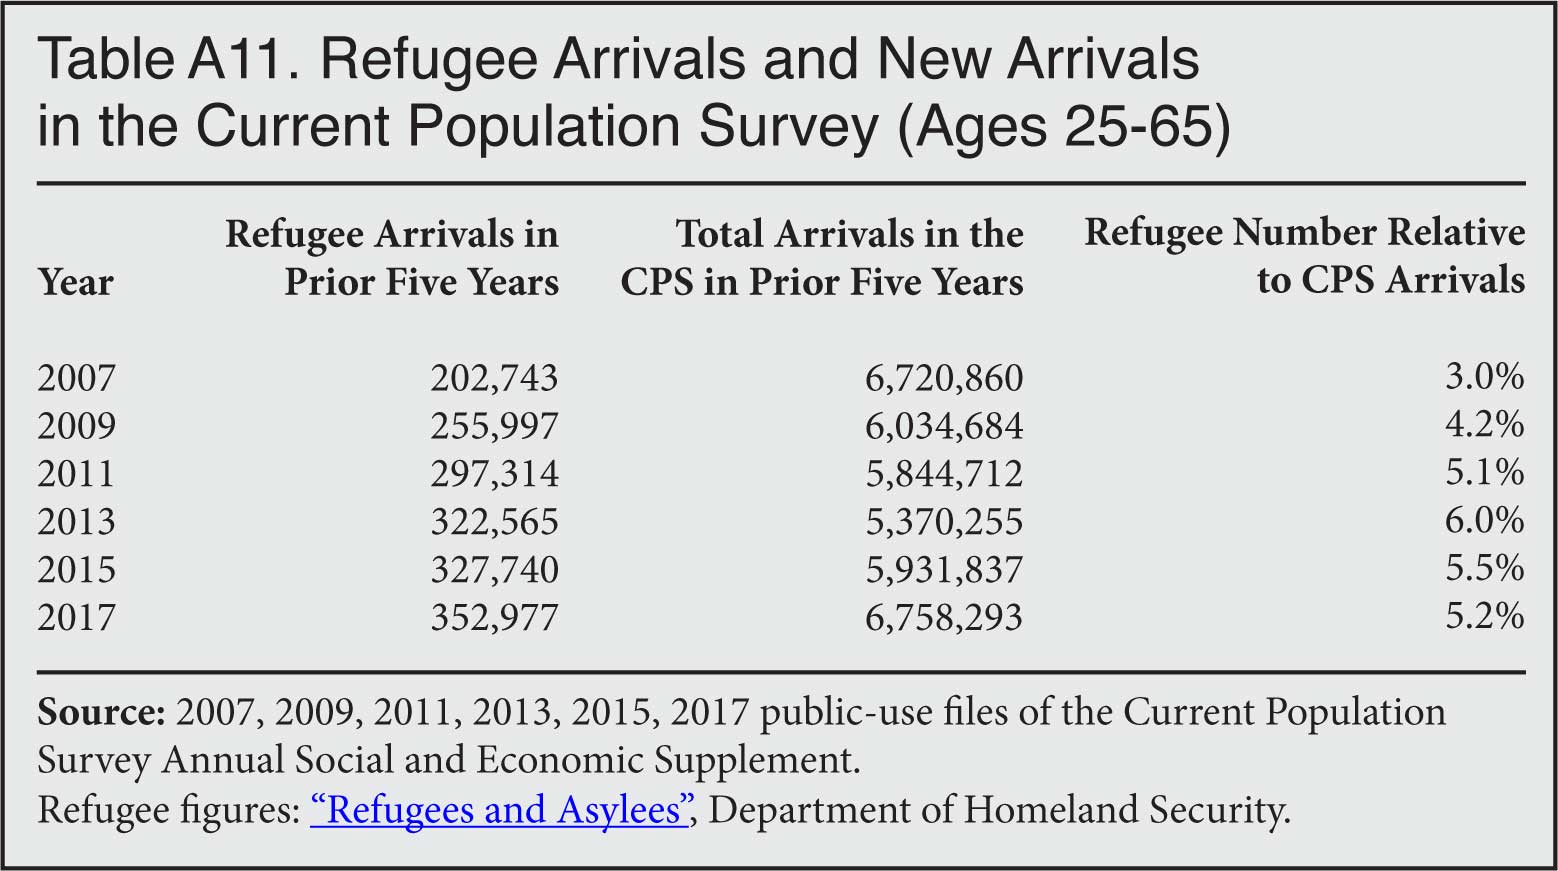 Table: Refugee Arrivals and New Arrivals in the Current Population Survey, 2007-2017